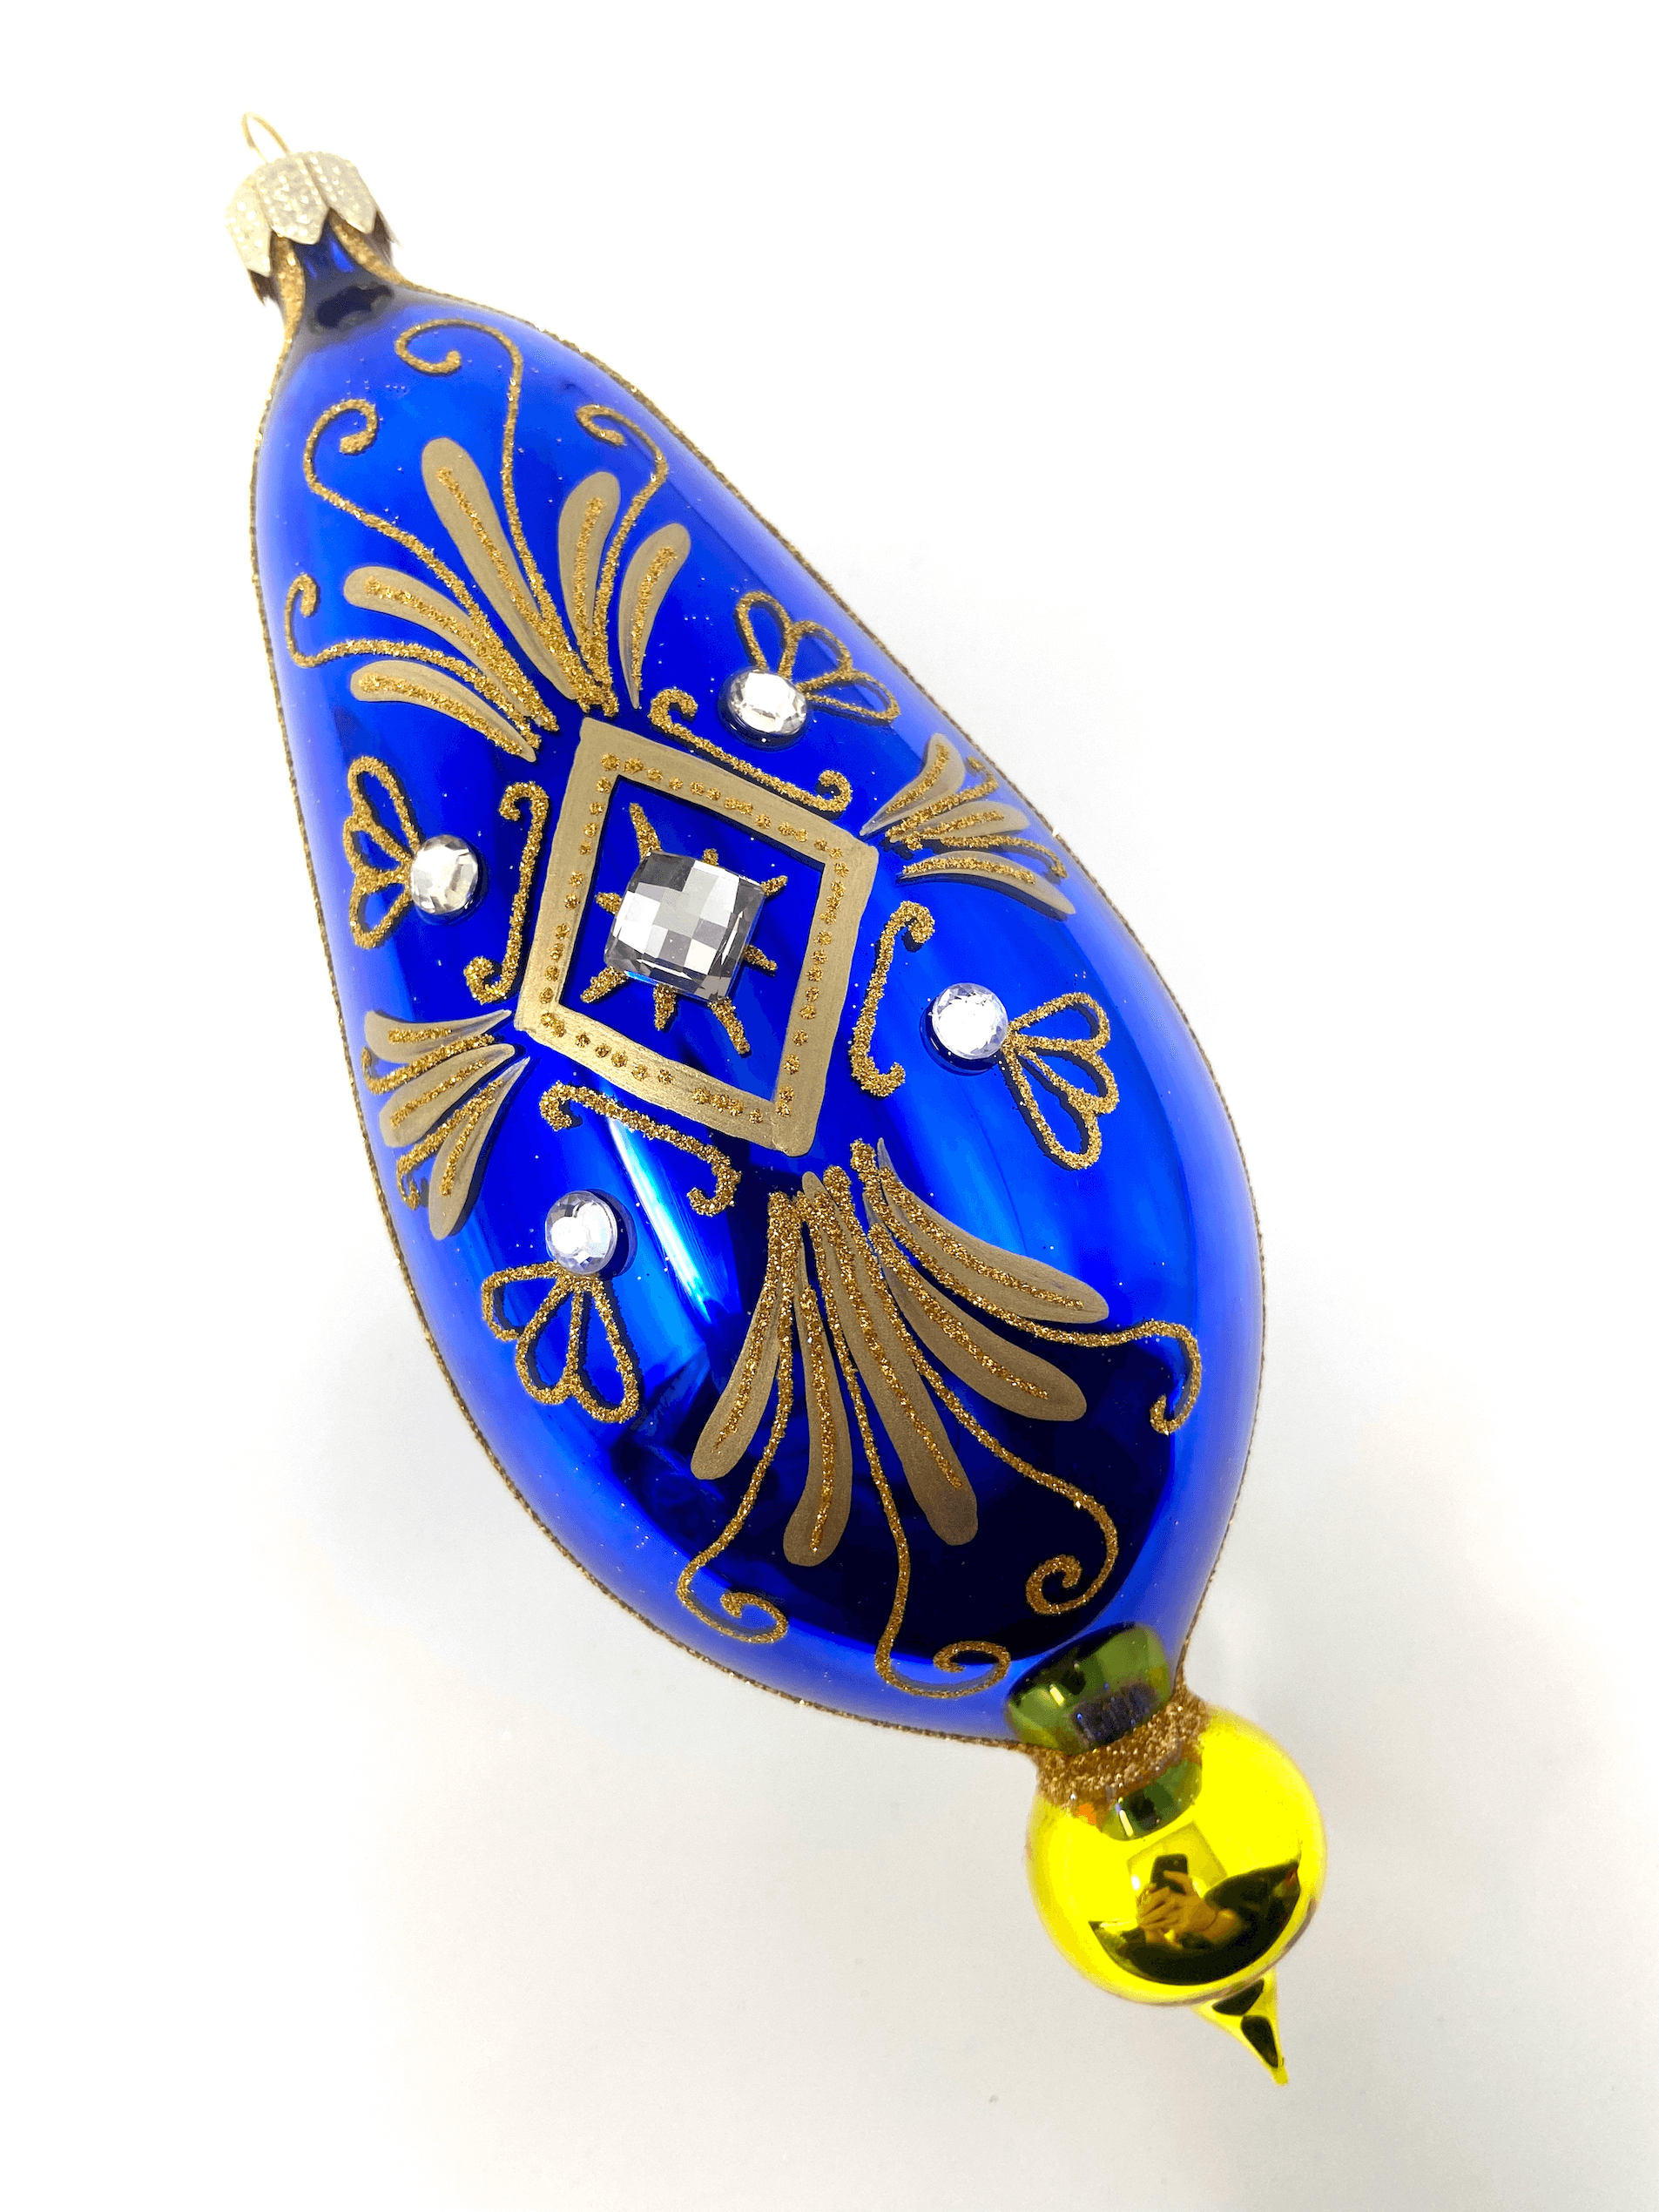 Blue eggplant shaped ornament featuring gemstones, intricate gold detailing, and hand painted floral blooms. A Christmas polish glass ornament. Floral Escape Floral Fetish.